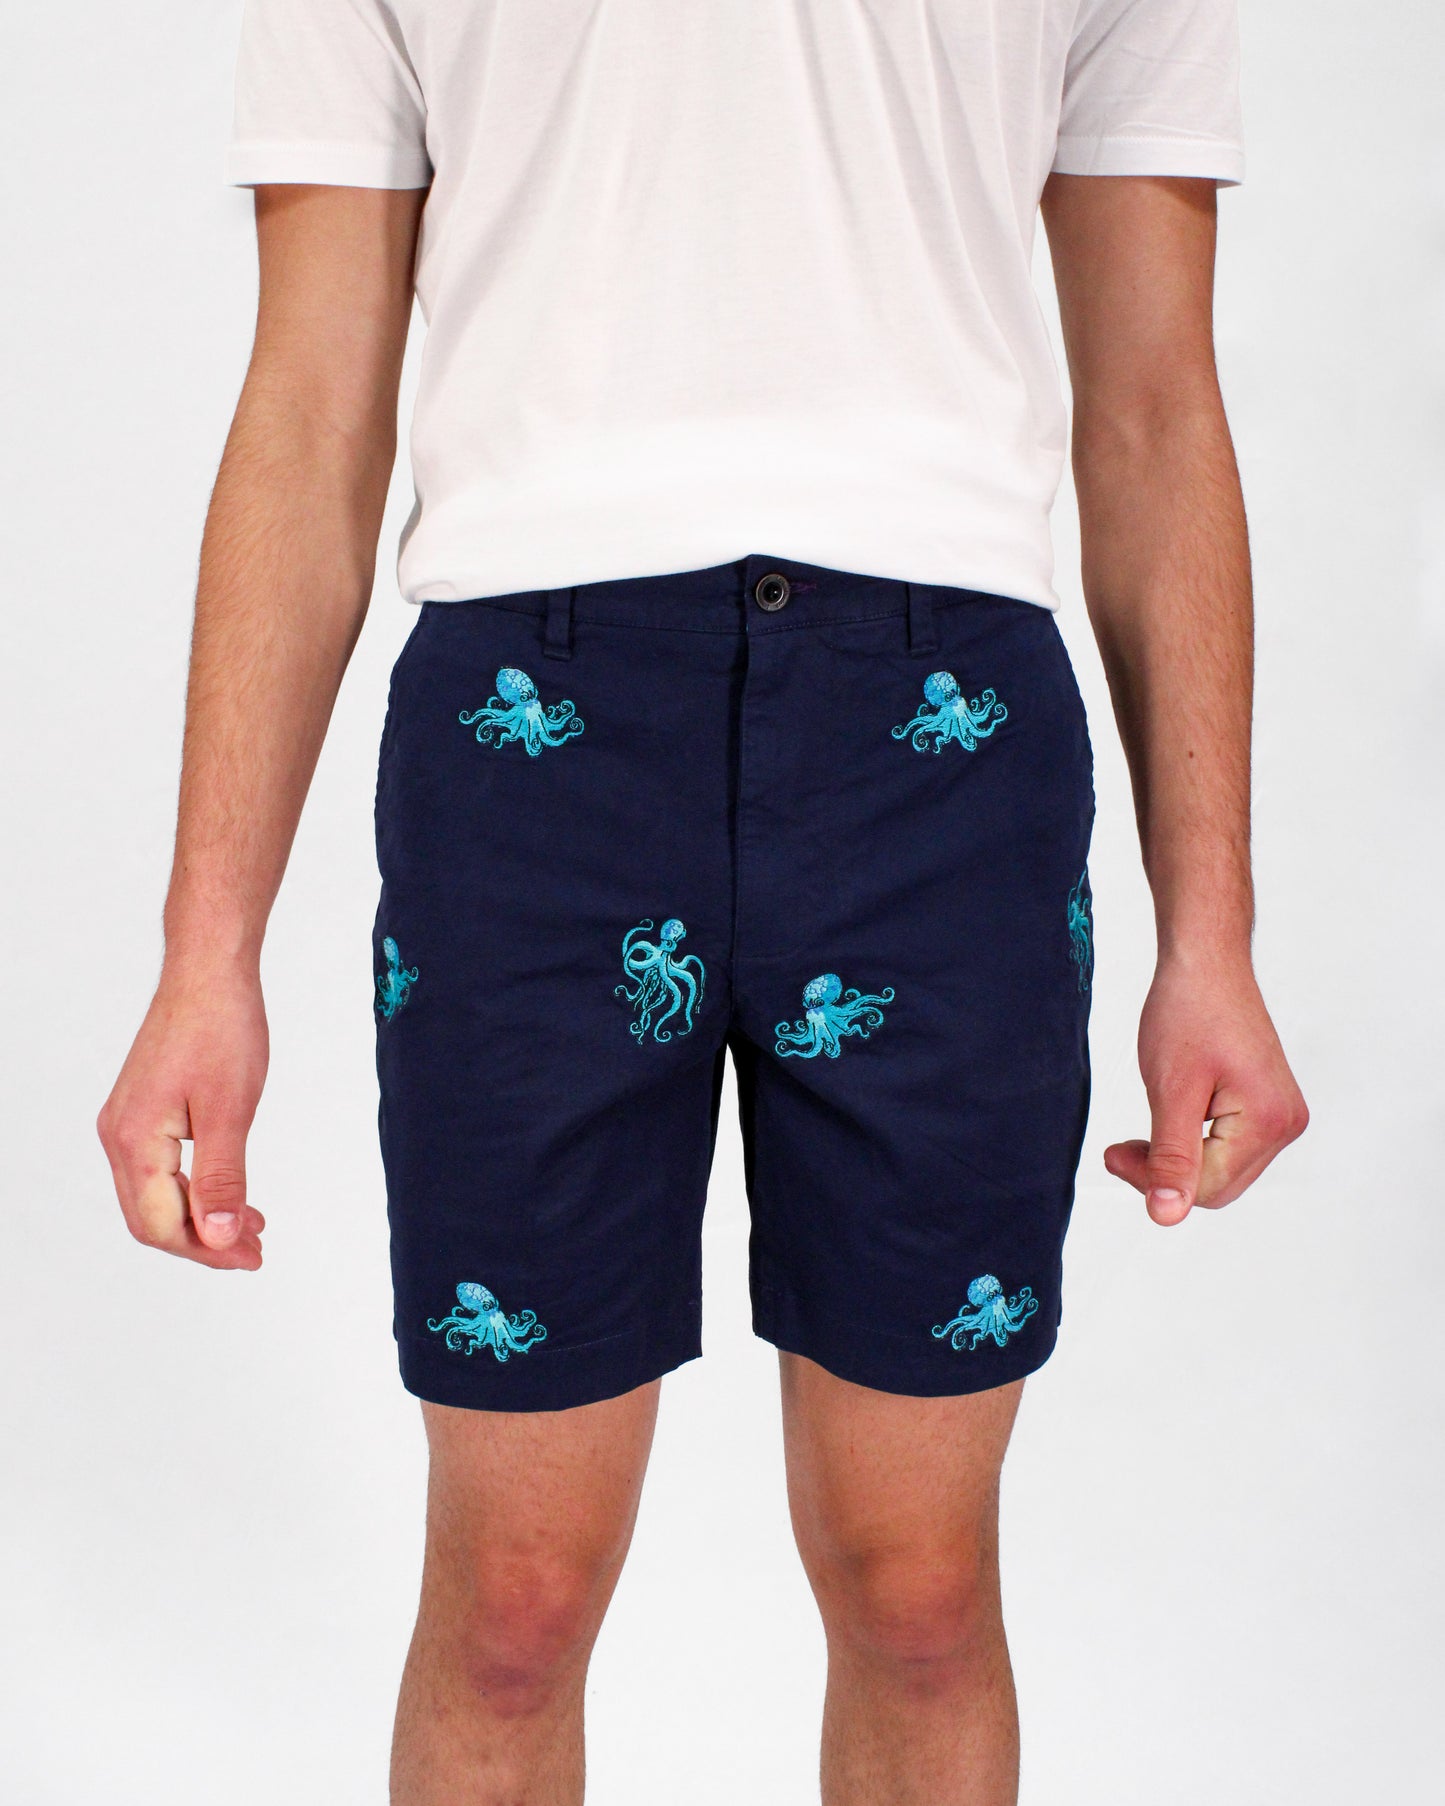 EDWARD OCTOPUS EMBROIDERY SHORTS IN NAVY